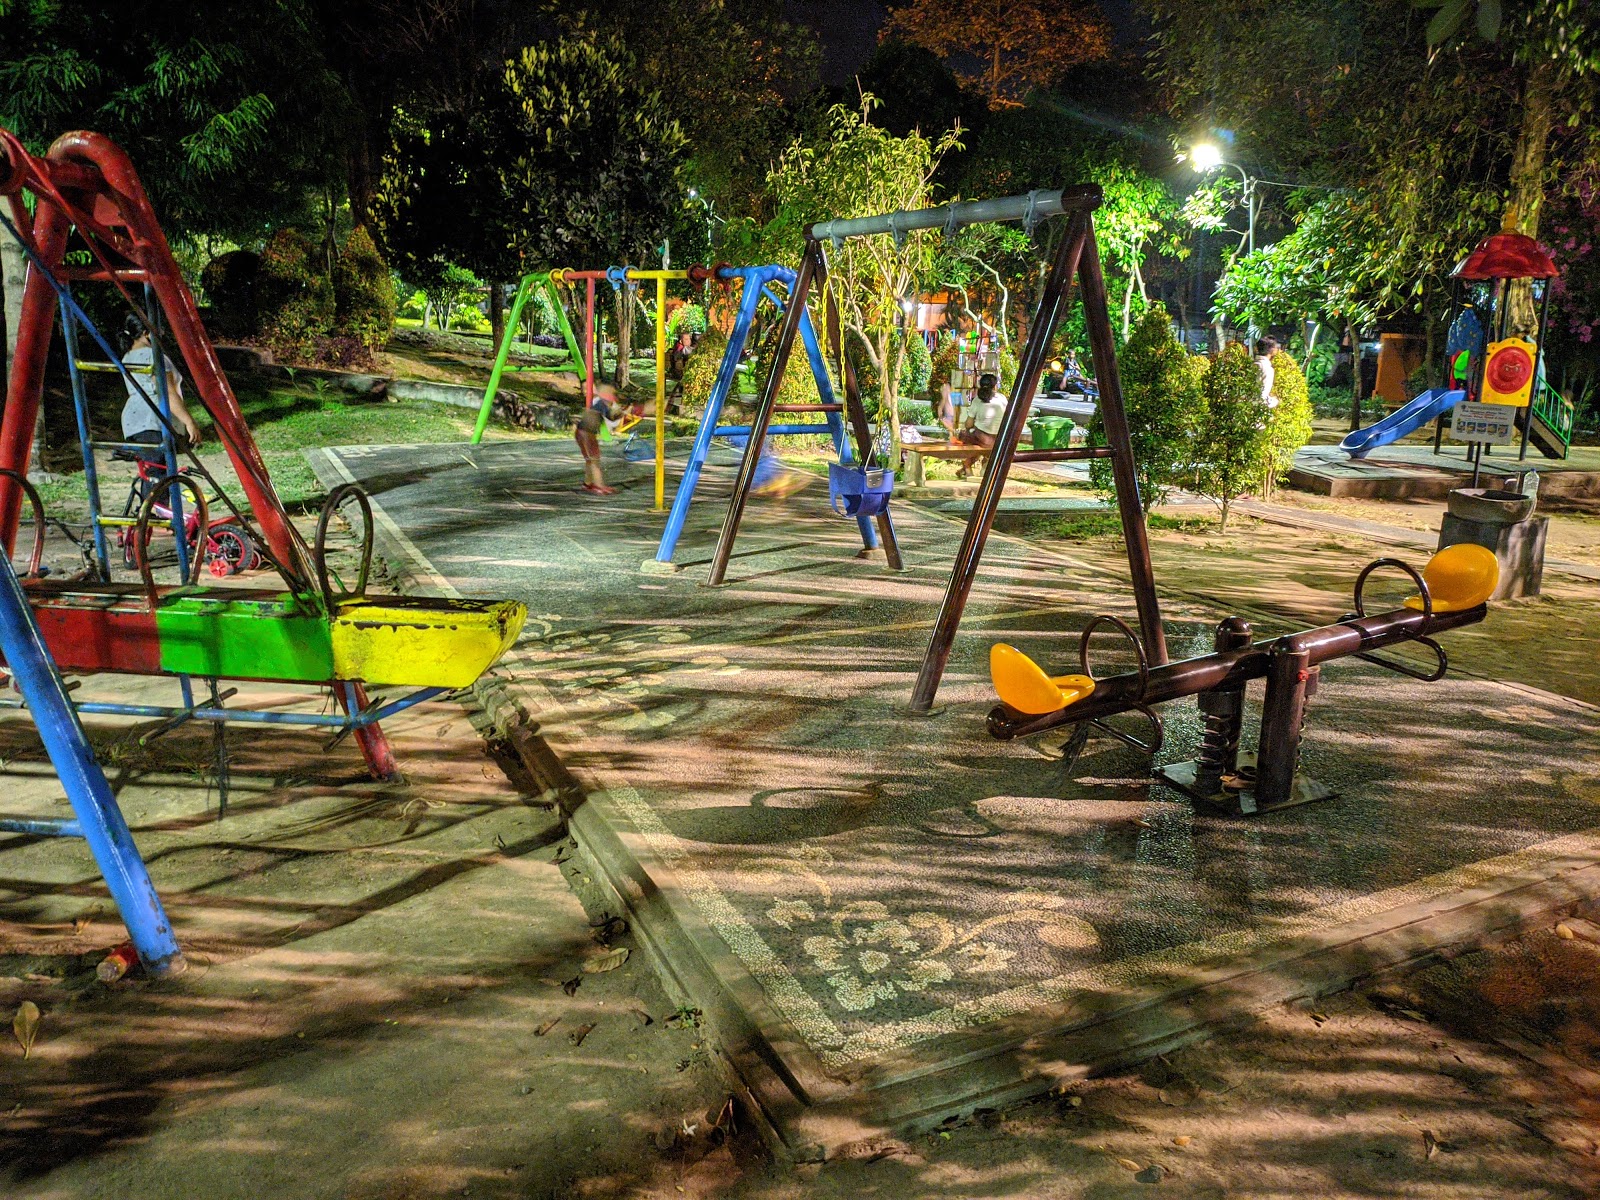 YOUTH PARK